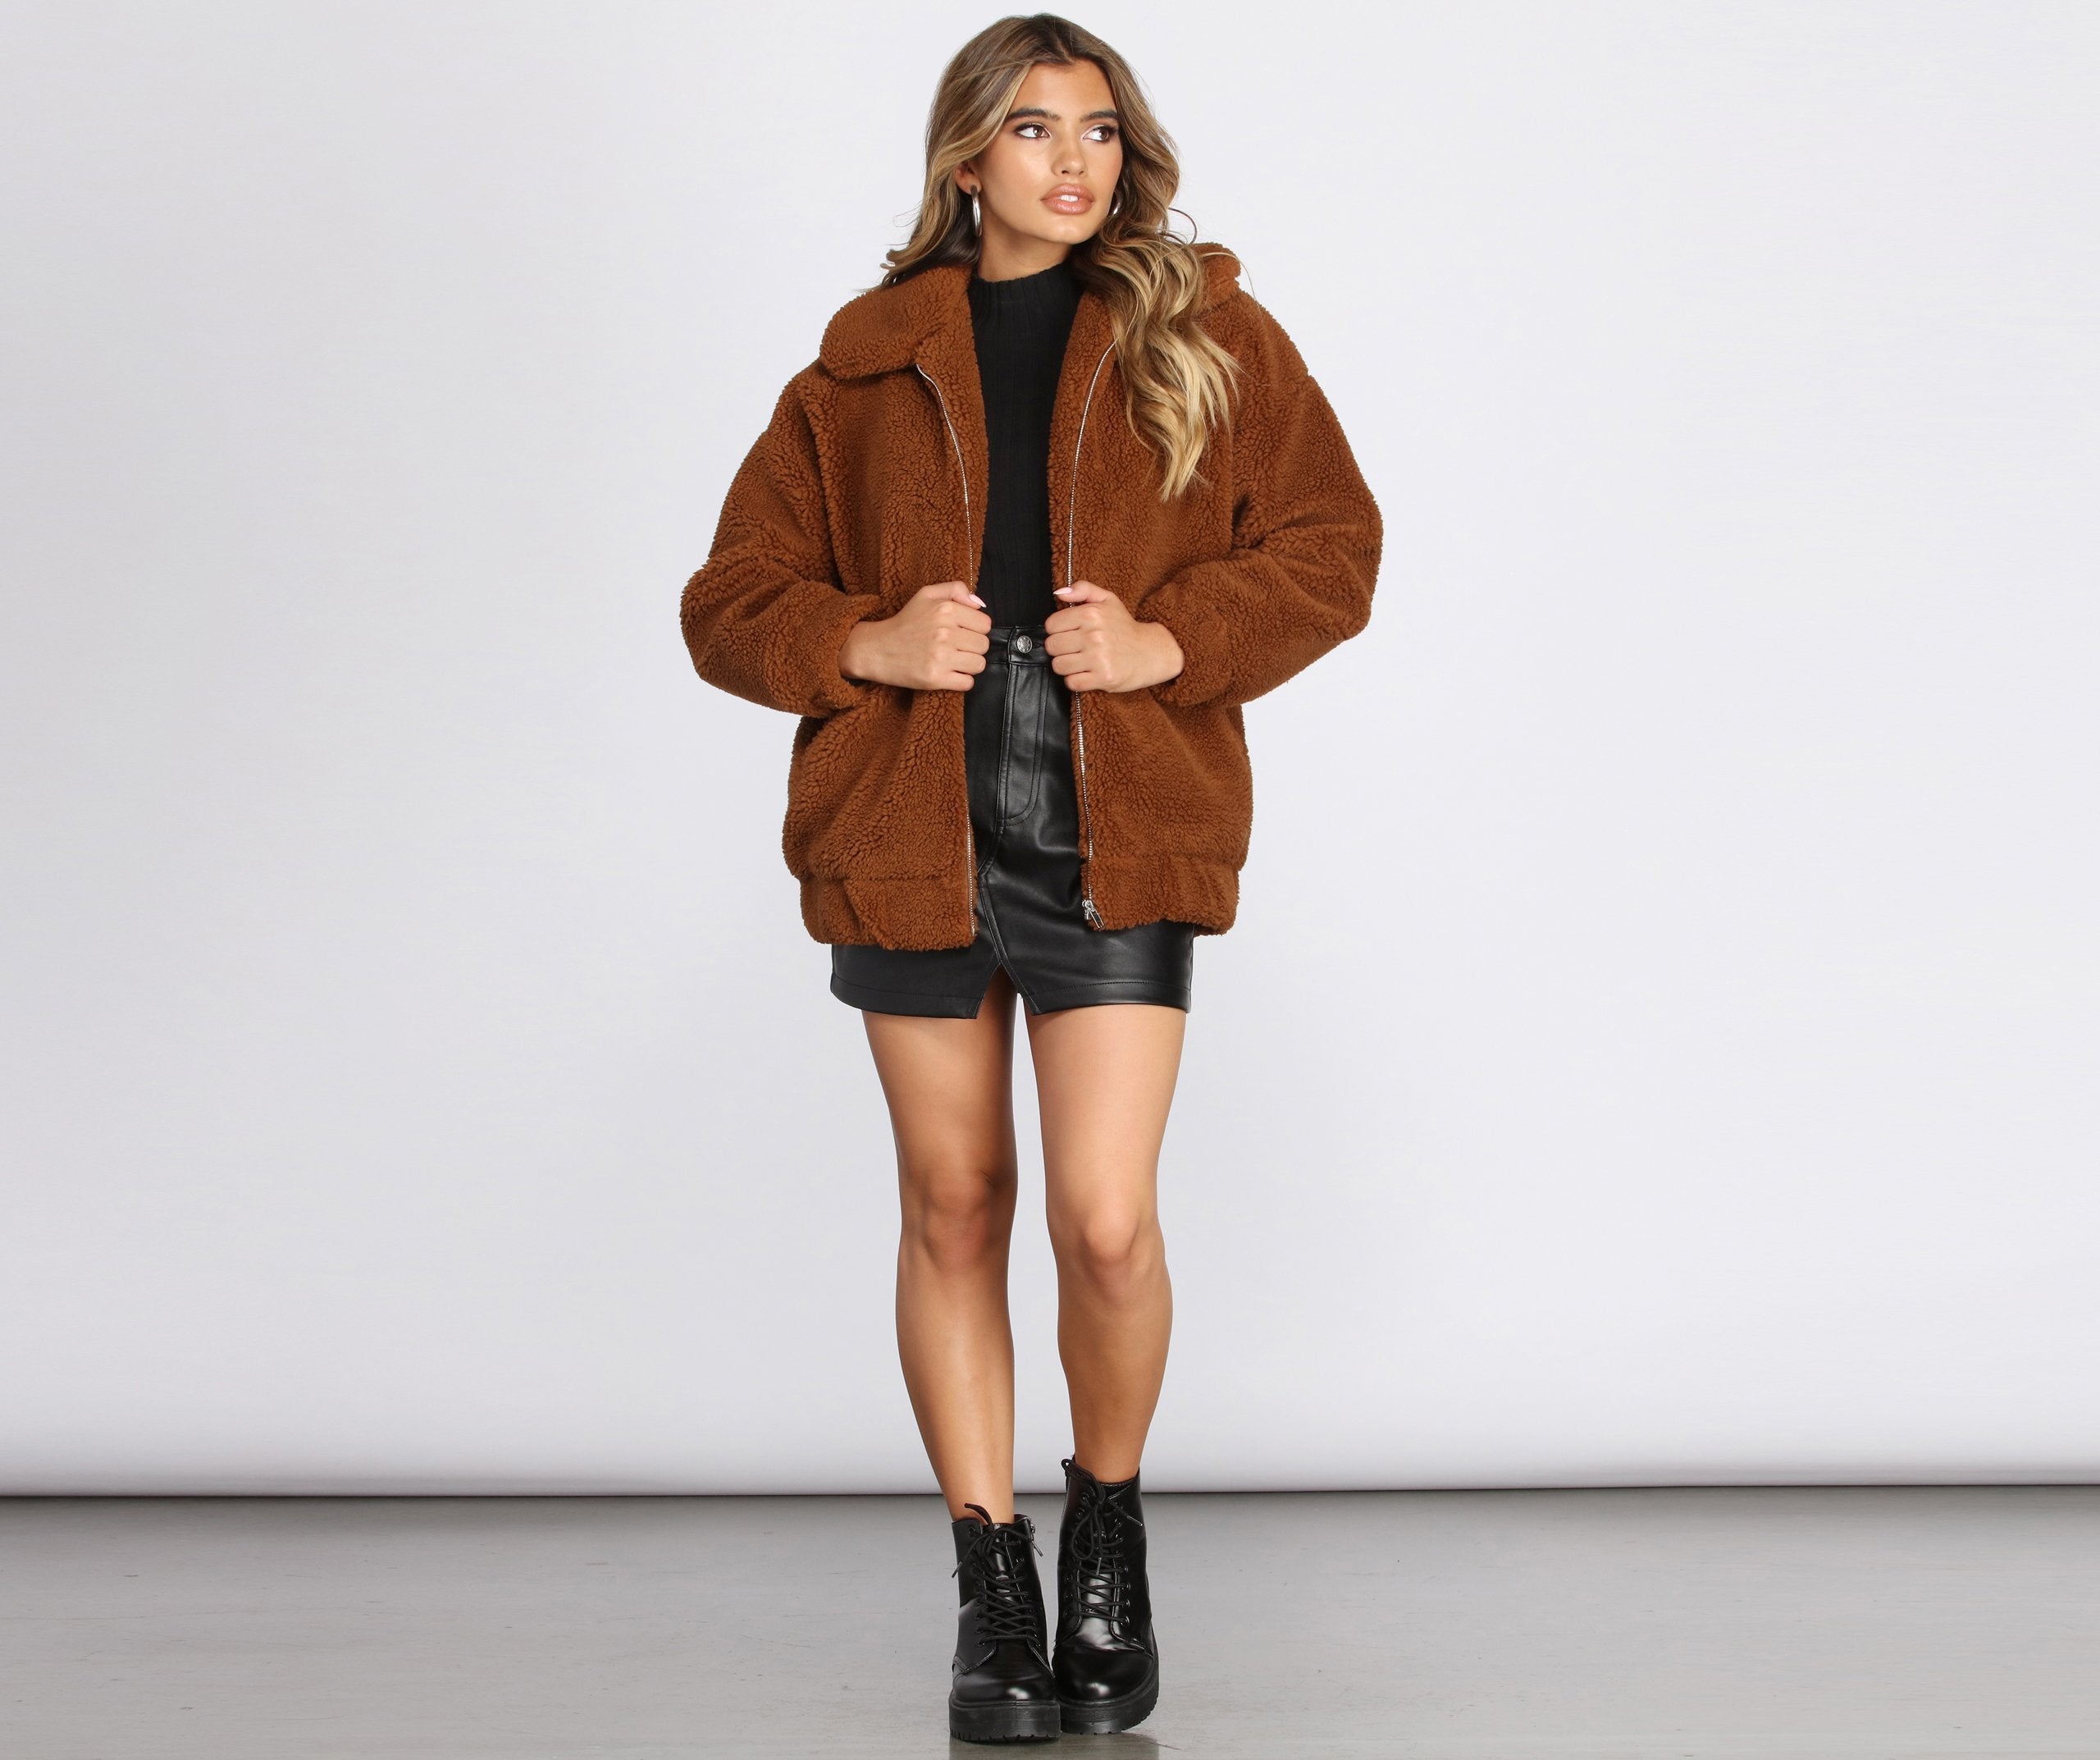 On It Over-sized Teddy Jacket - Lady Occasions